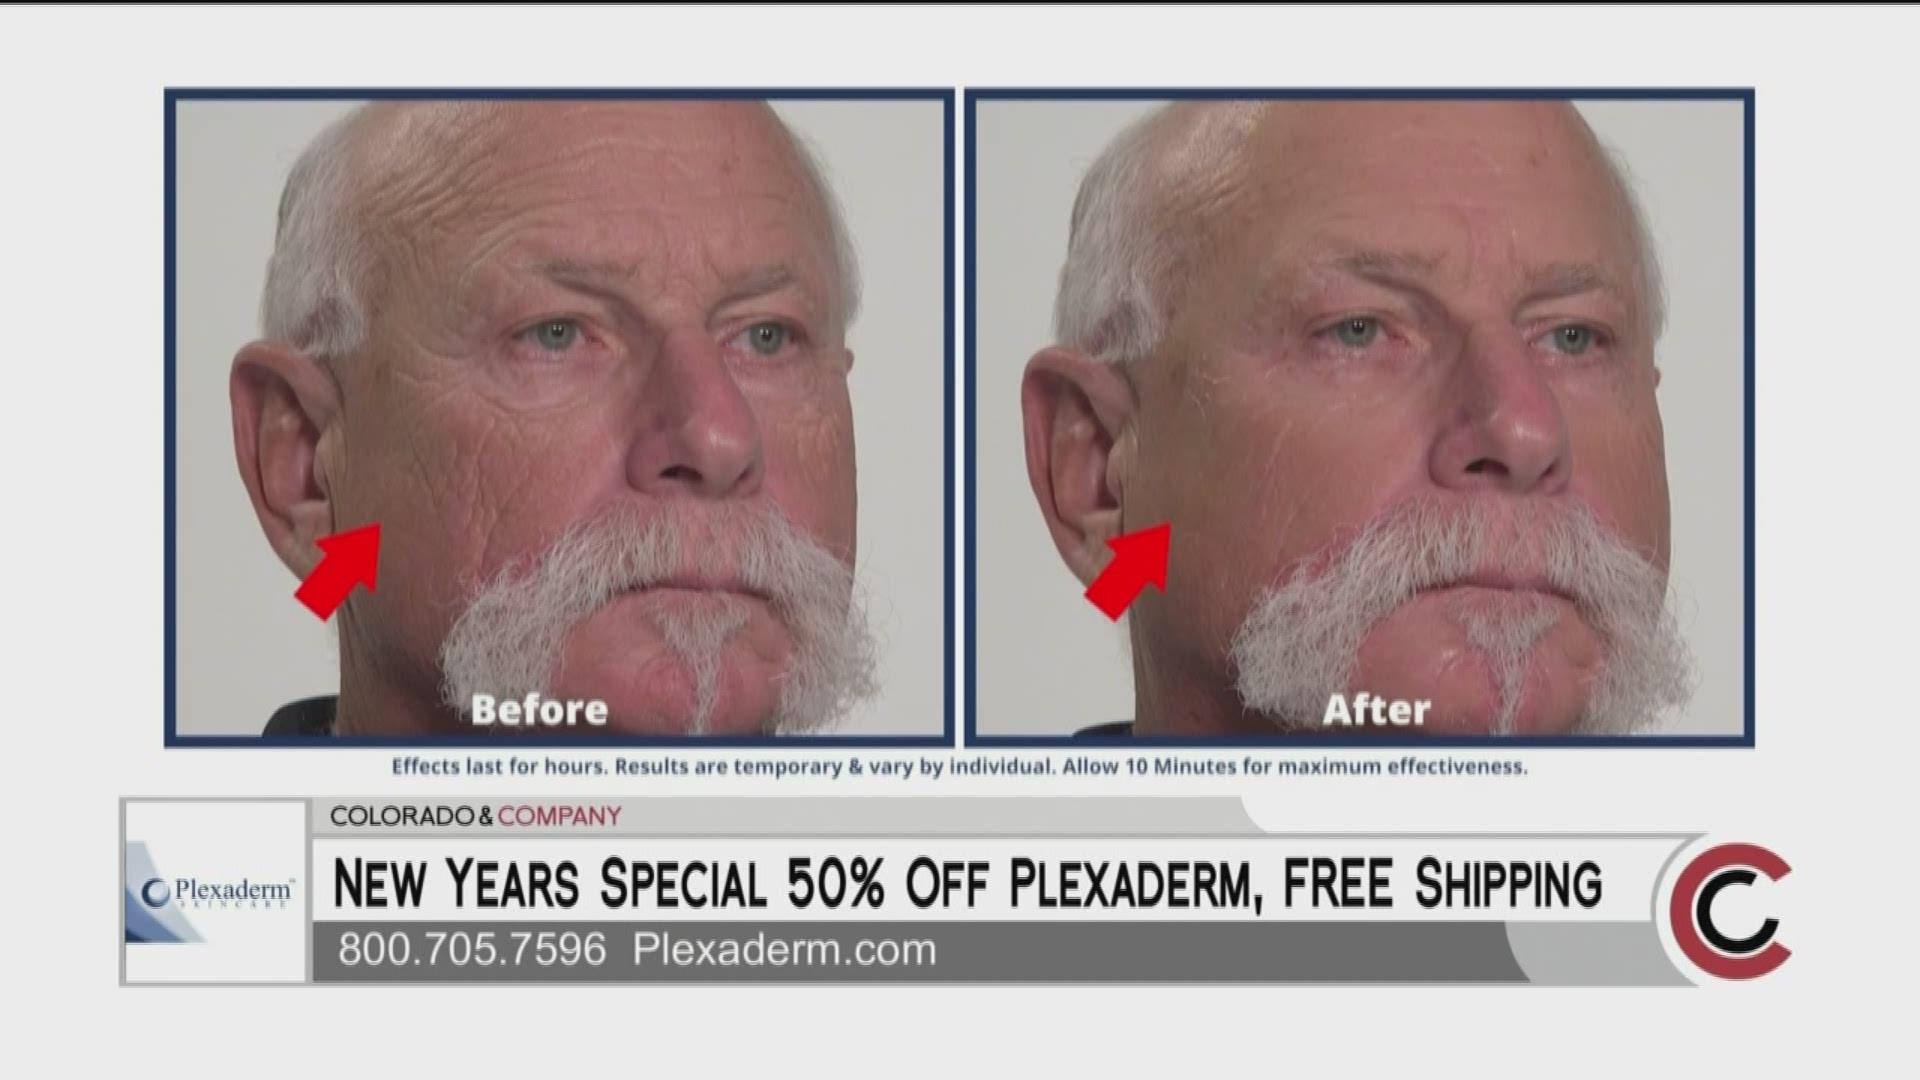 Call Plexaderm at 800.705.7596 and order yours today! Take advantage of 50% off and free shipping. Learn more at Plexaderm.com.